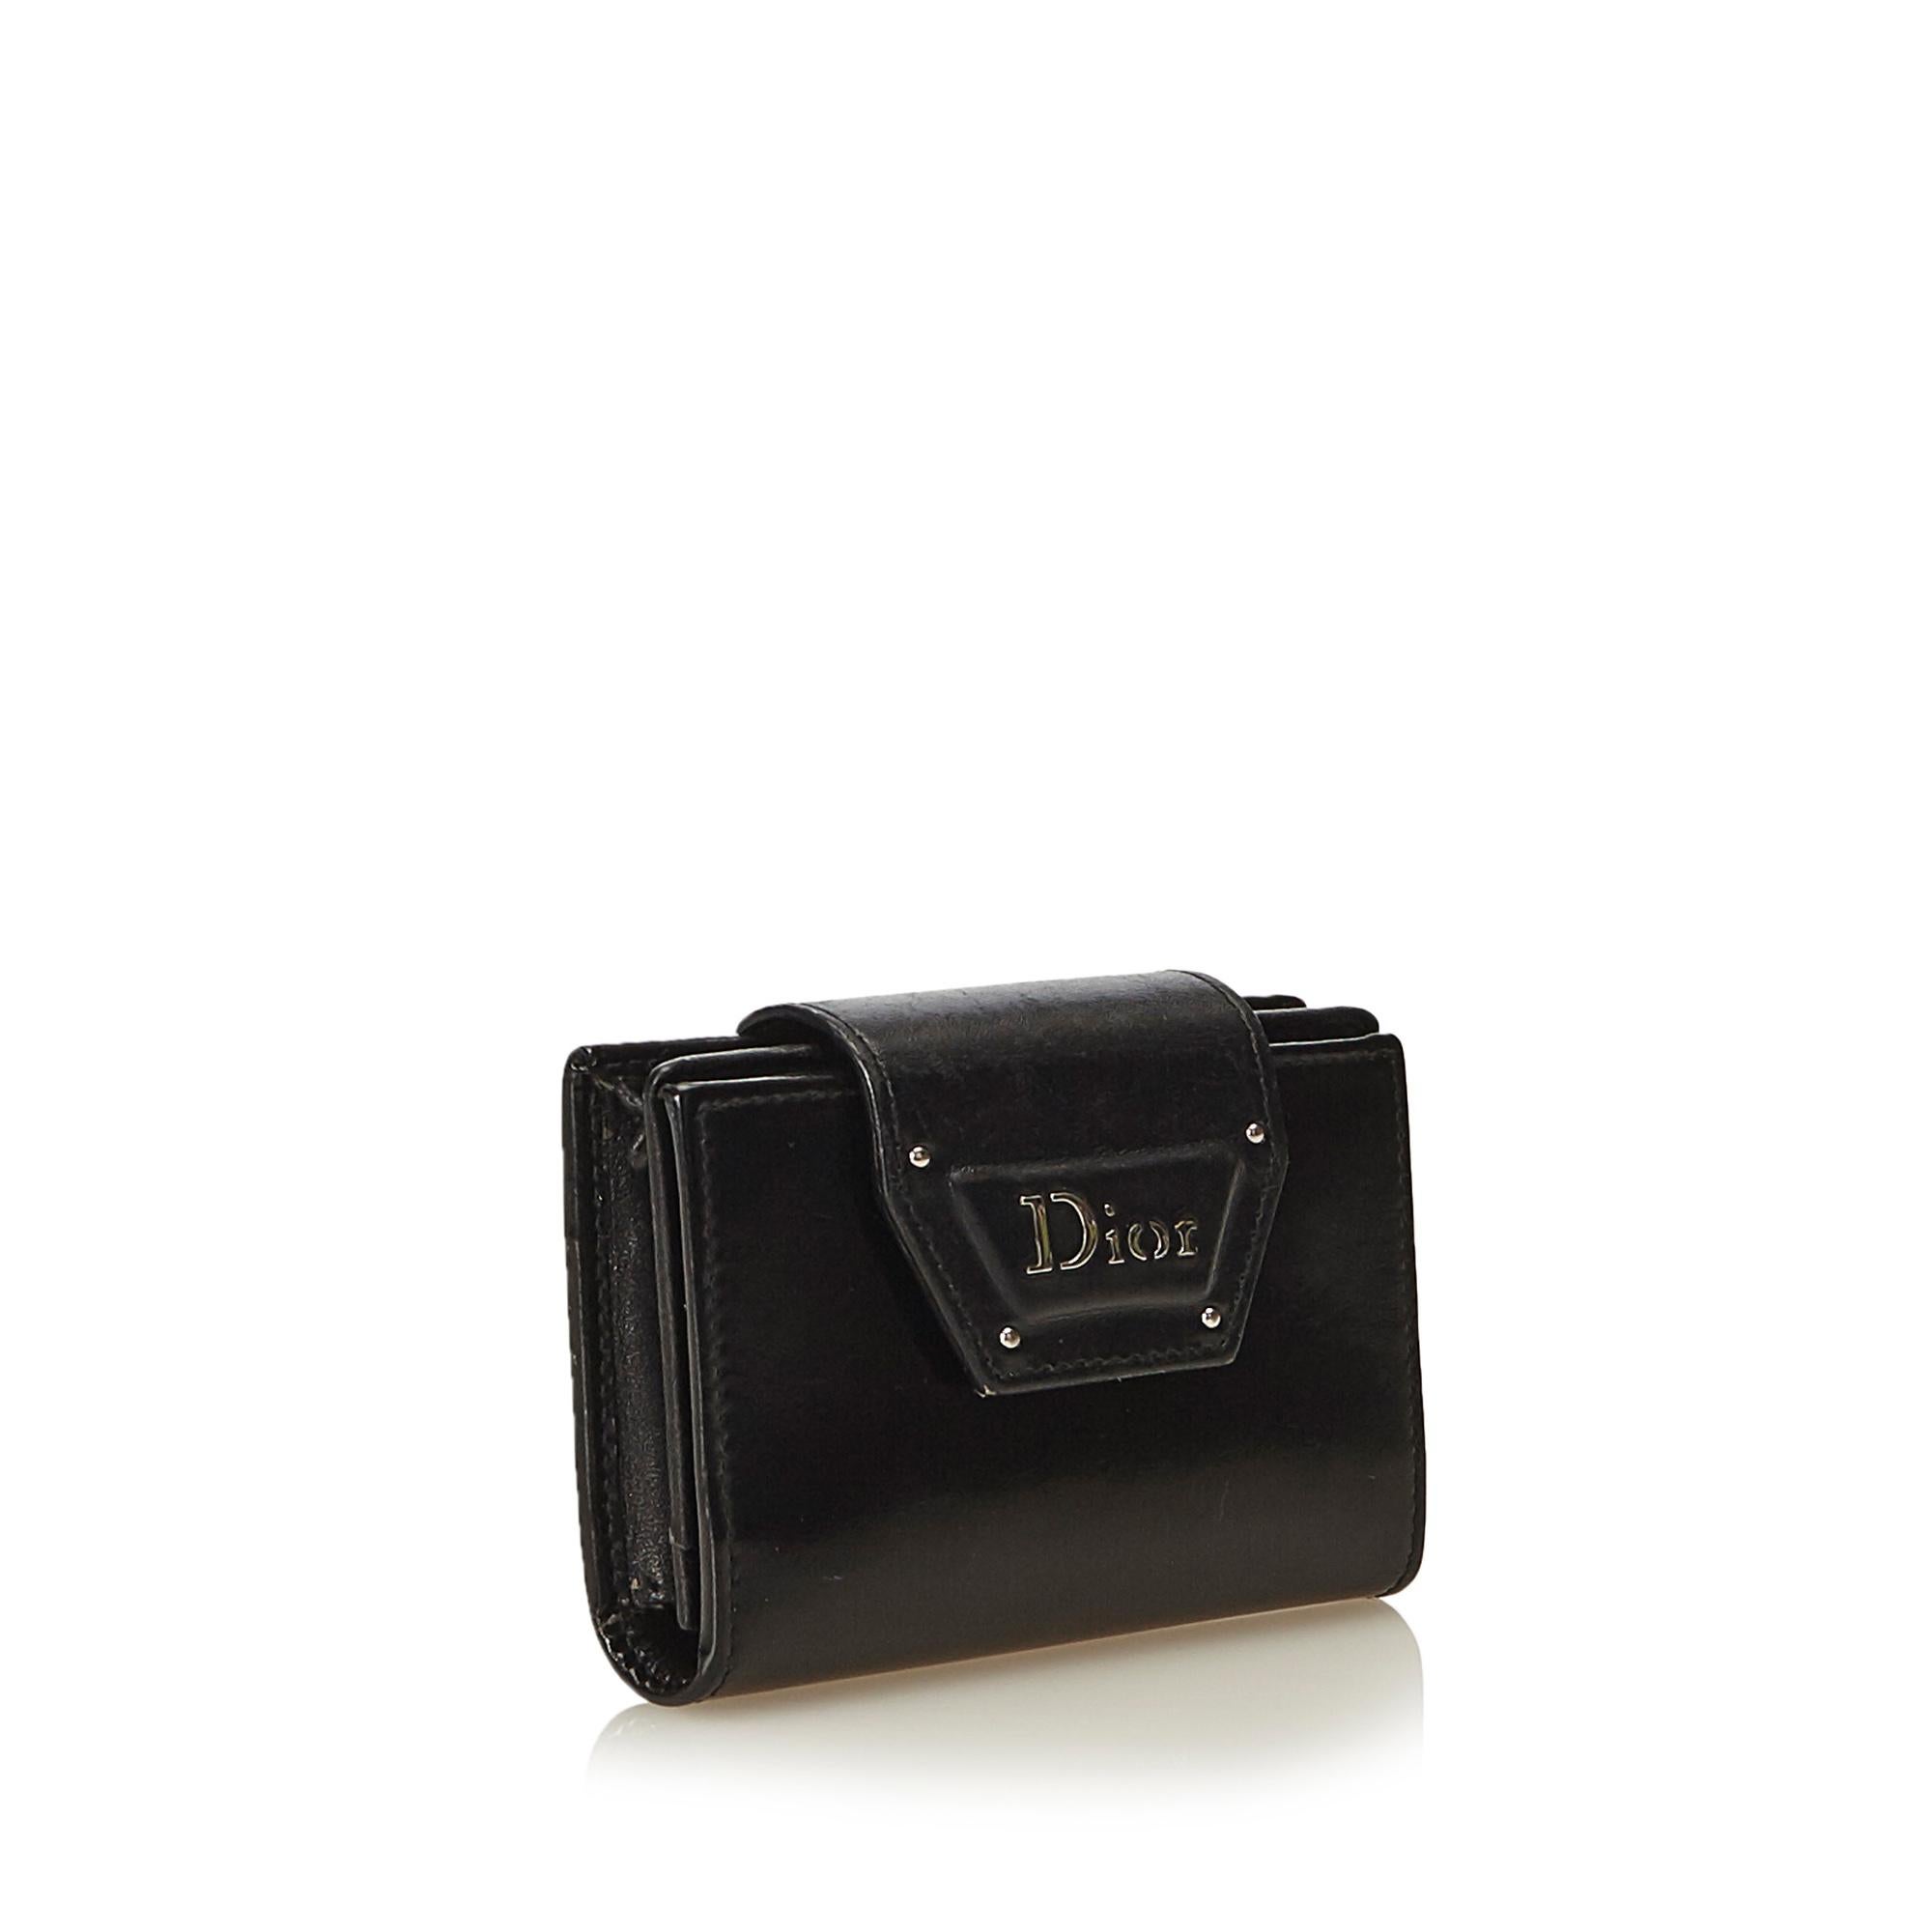 This card case features a leather body, strap with snap closure, and interior slip pockets. It carries as B+ condition rating.

Inclusions: 
This item does not come with inclusions.

Dimensions:
Length: 7.50 cm
Width: 11.00 cm
Depth: 2.00